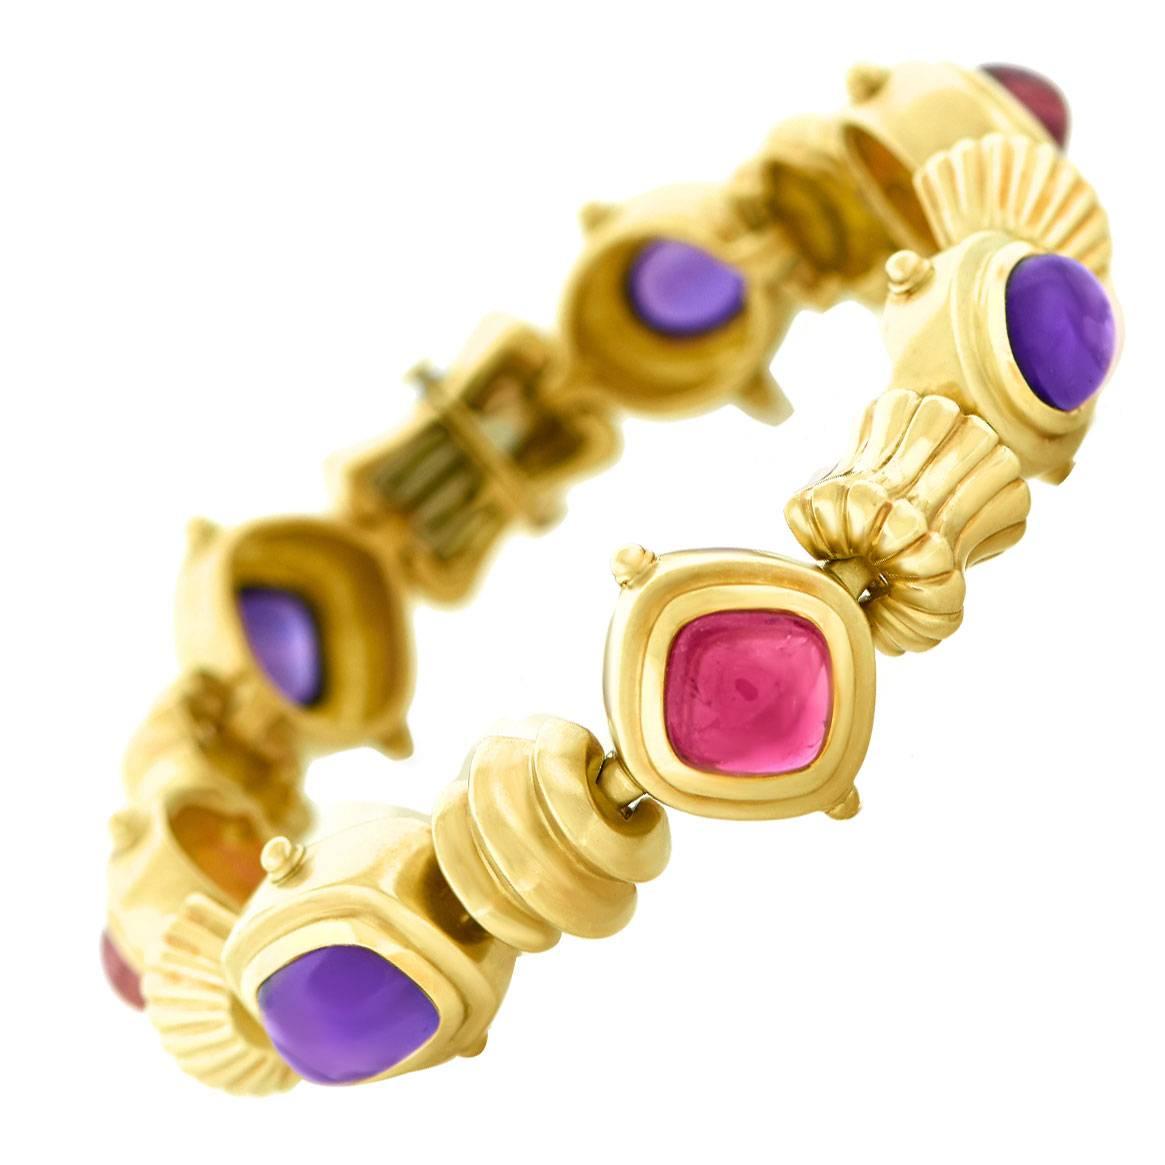 Seidengang One-of-a-Kind Tourmaline and Amethyst Gold Bracelet